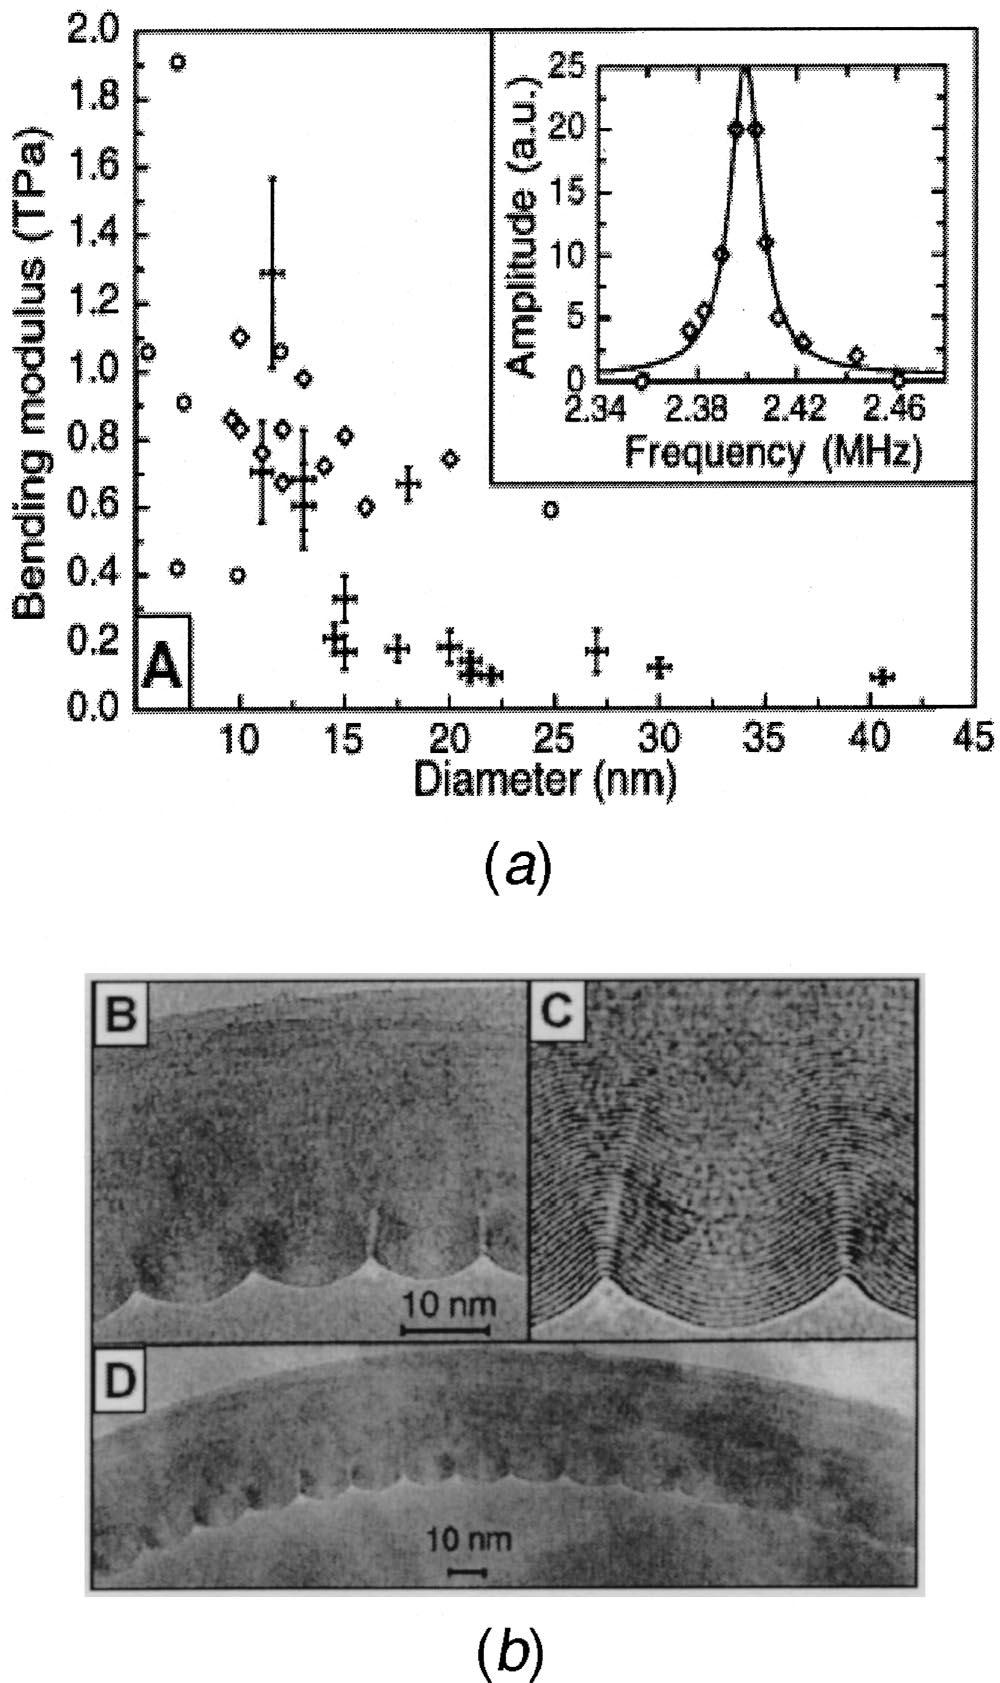 220 Srivastava et al: Nanomechanics of carbon nanotubes and composites Appl Mech Rev vol 56, no 2, March 2003 reasonable assumption for the wall thickness for evaluation of Young s modulus.